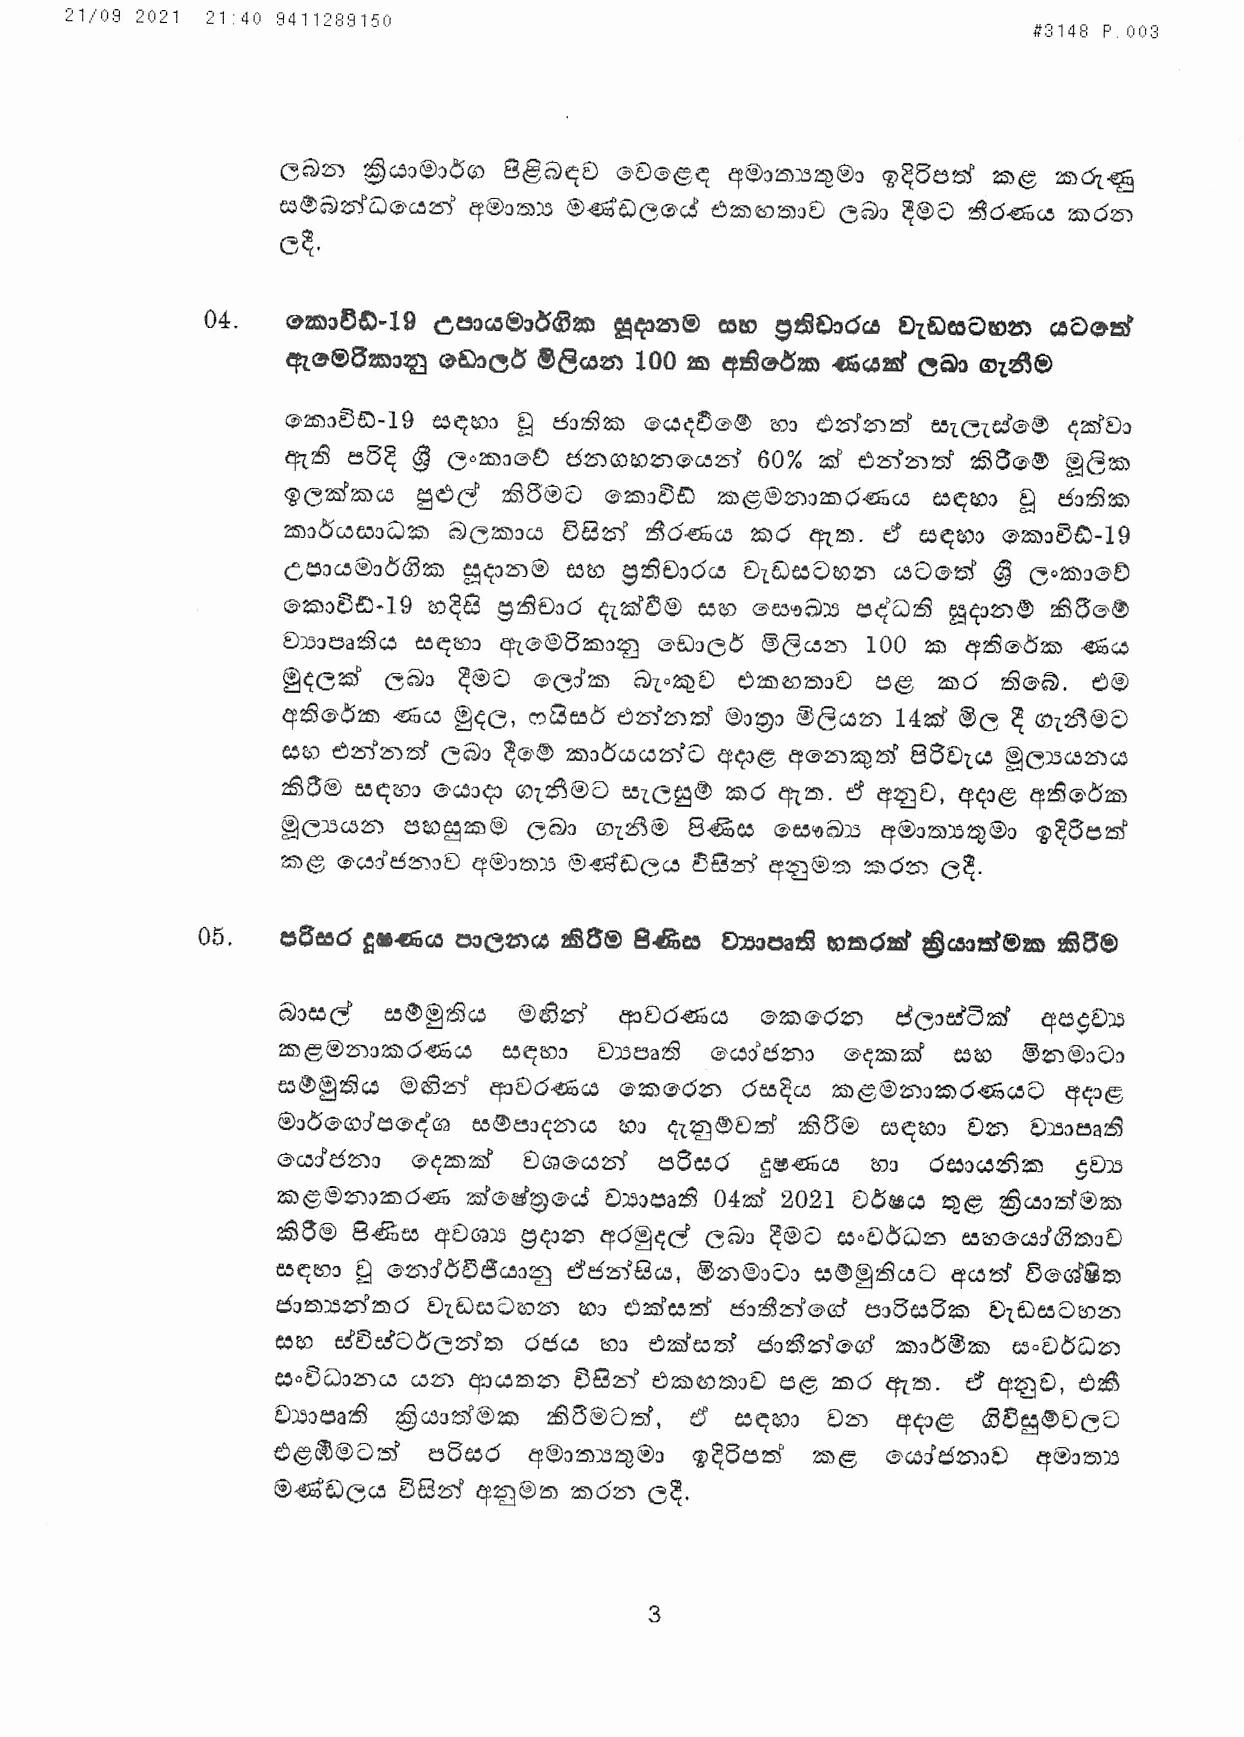 Cabinet Decisions on 21.09.2021 page 003